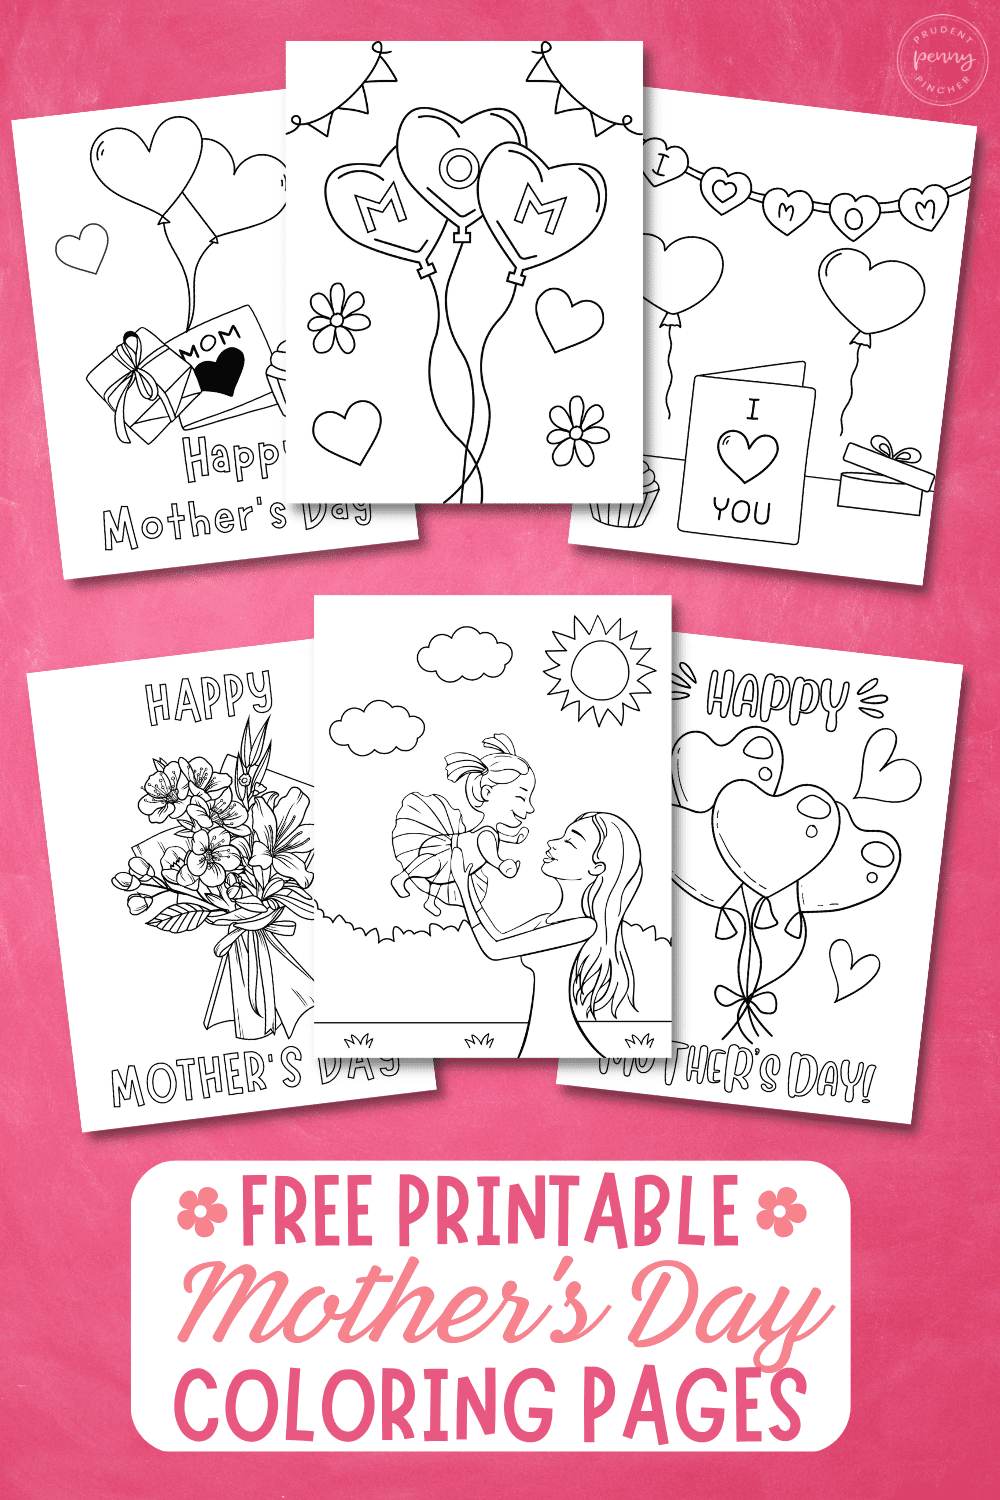 Free Printable Mother's Day Coloring Pages for Kids